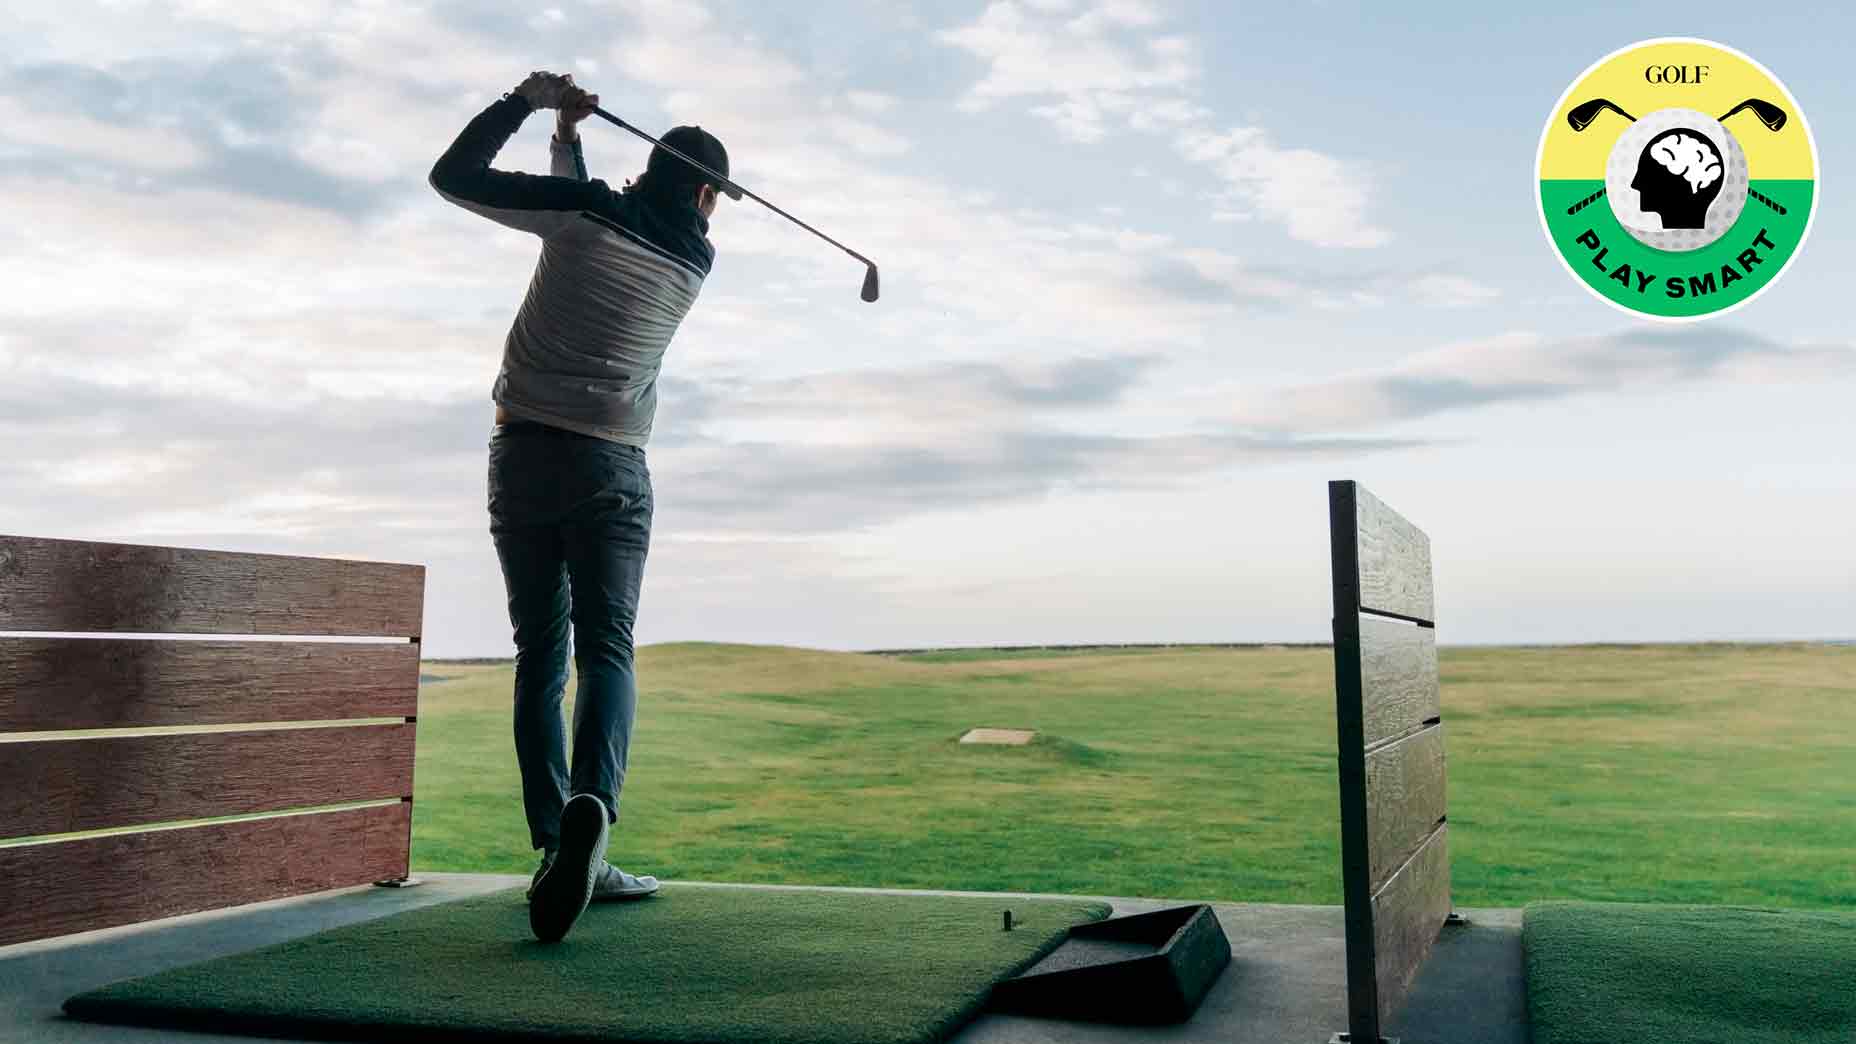 GOLF Top 100 Teacher Jim Murphy shares some of his favorite practice tips when you're hitting off of a driving range mat